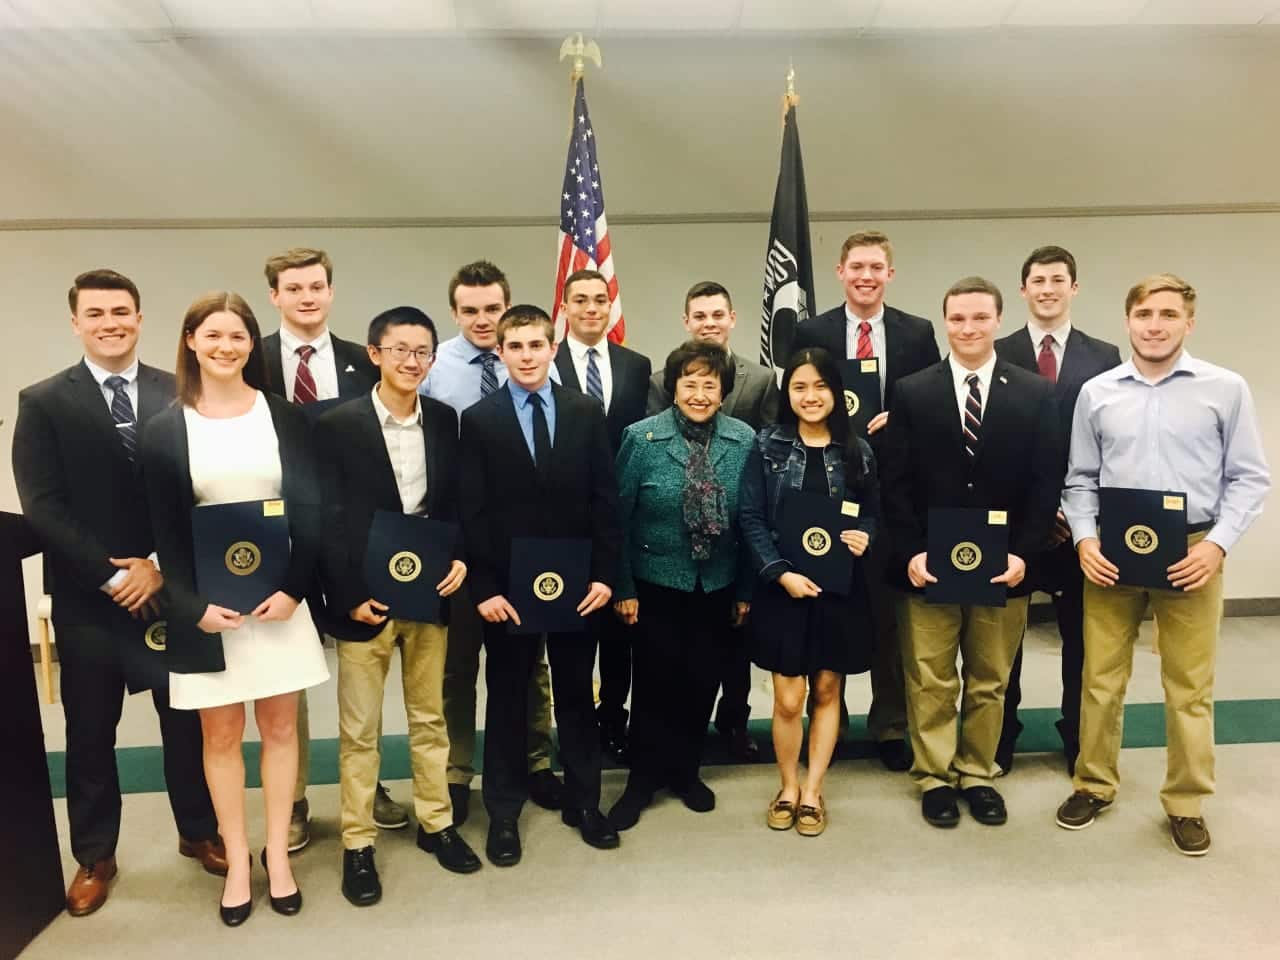 Sixteen students were nominated by Rep. Nita Lowey for admission into a service academy.